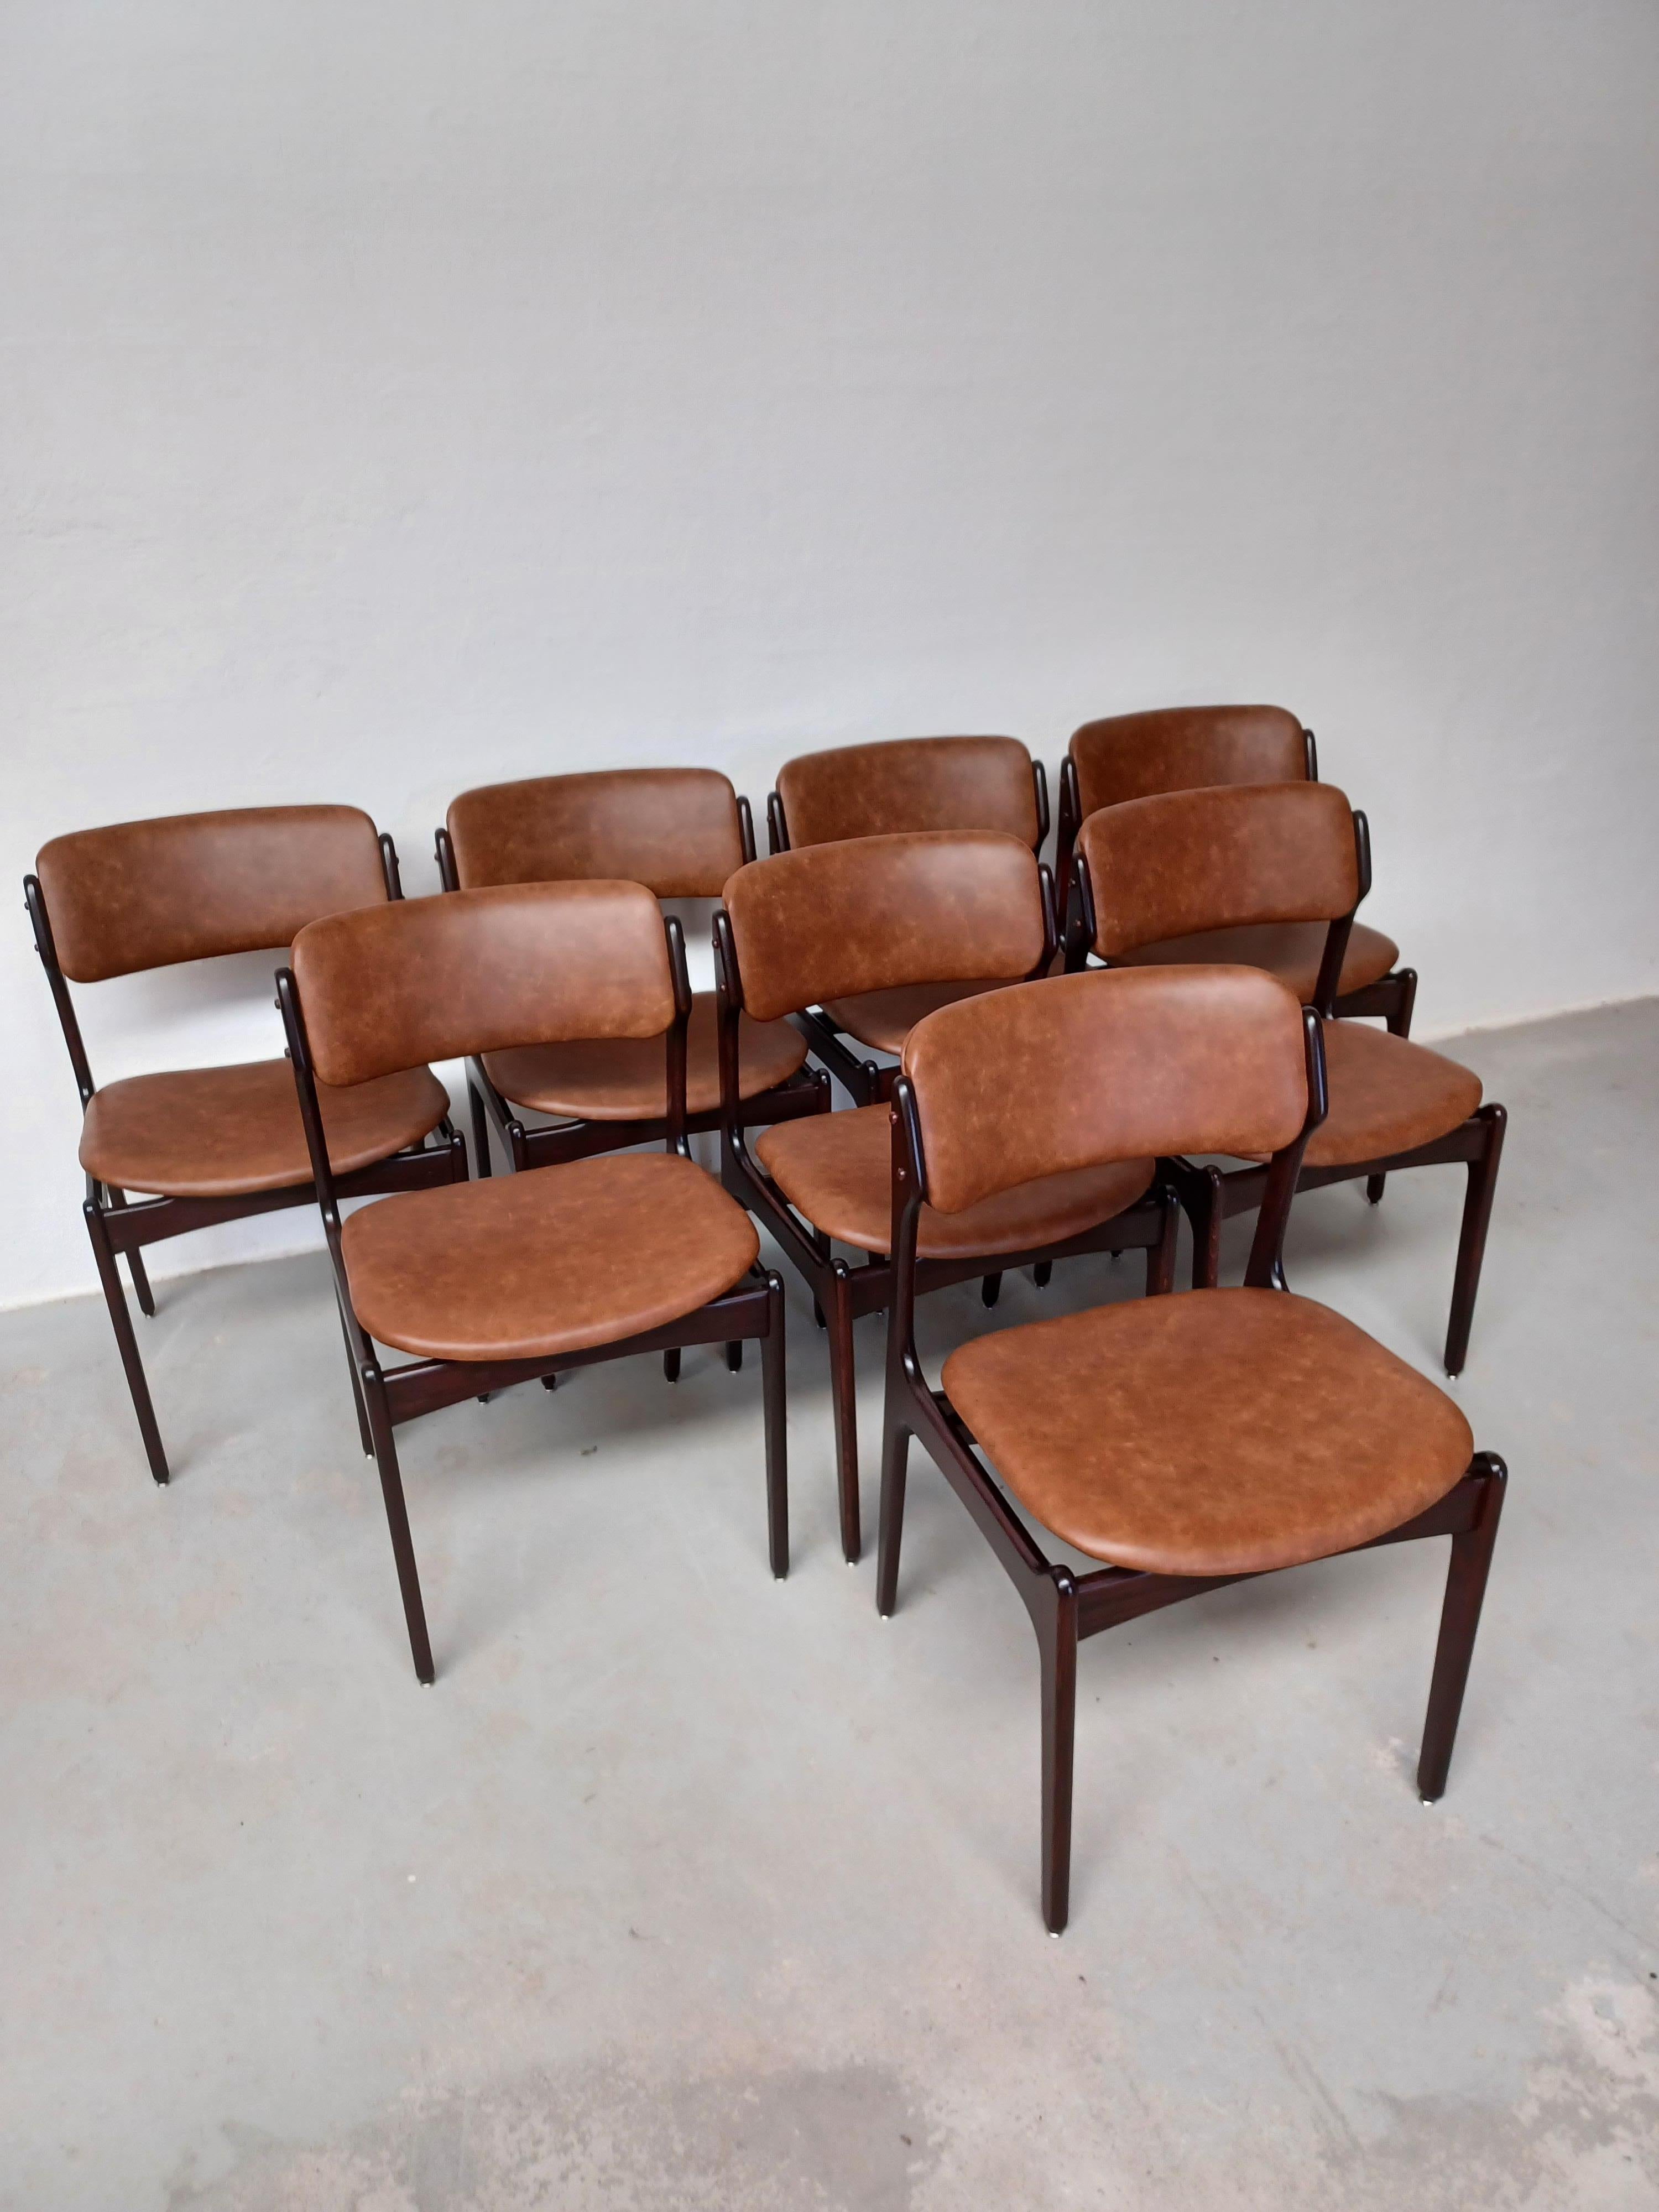 1960s set of eight  fully restored Erik Buch dining chairs in stained oak custom upholstery.

The chairs have a simple yet solid construction with elegant lines and provide a very comfortable seating experience on the elegant floating seat design